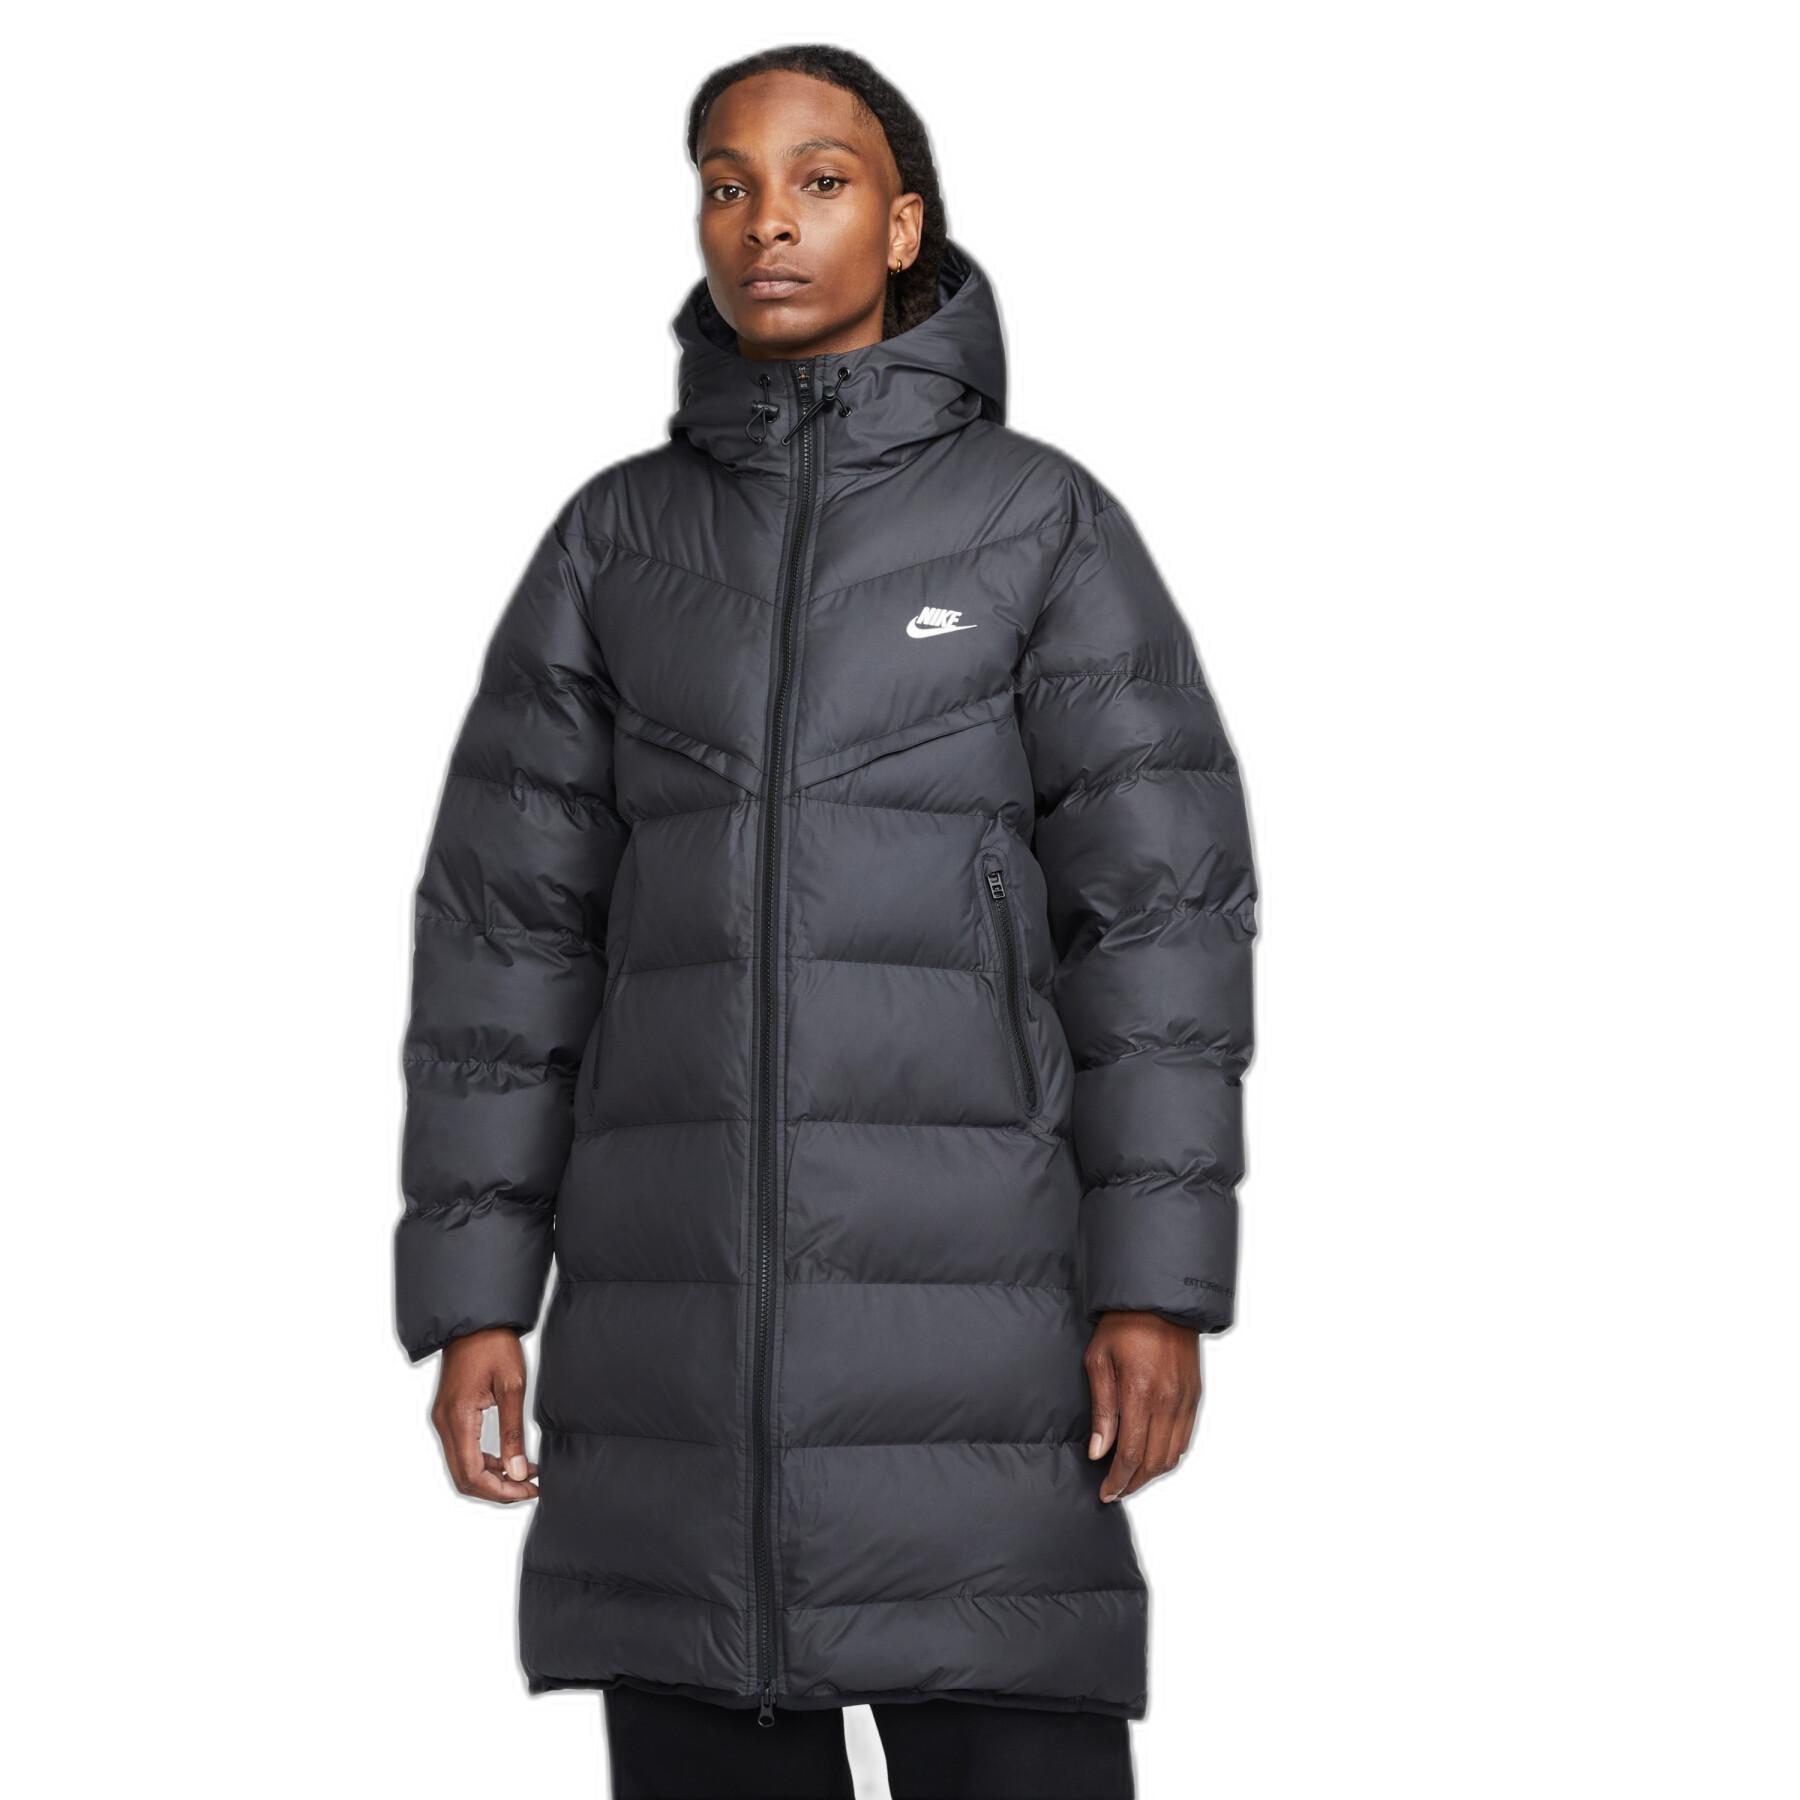 Down Filled Long Puffer Coat, Clothing Sale